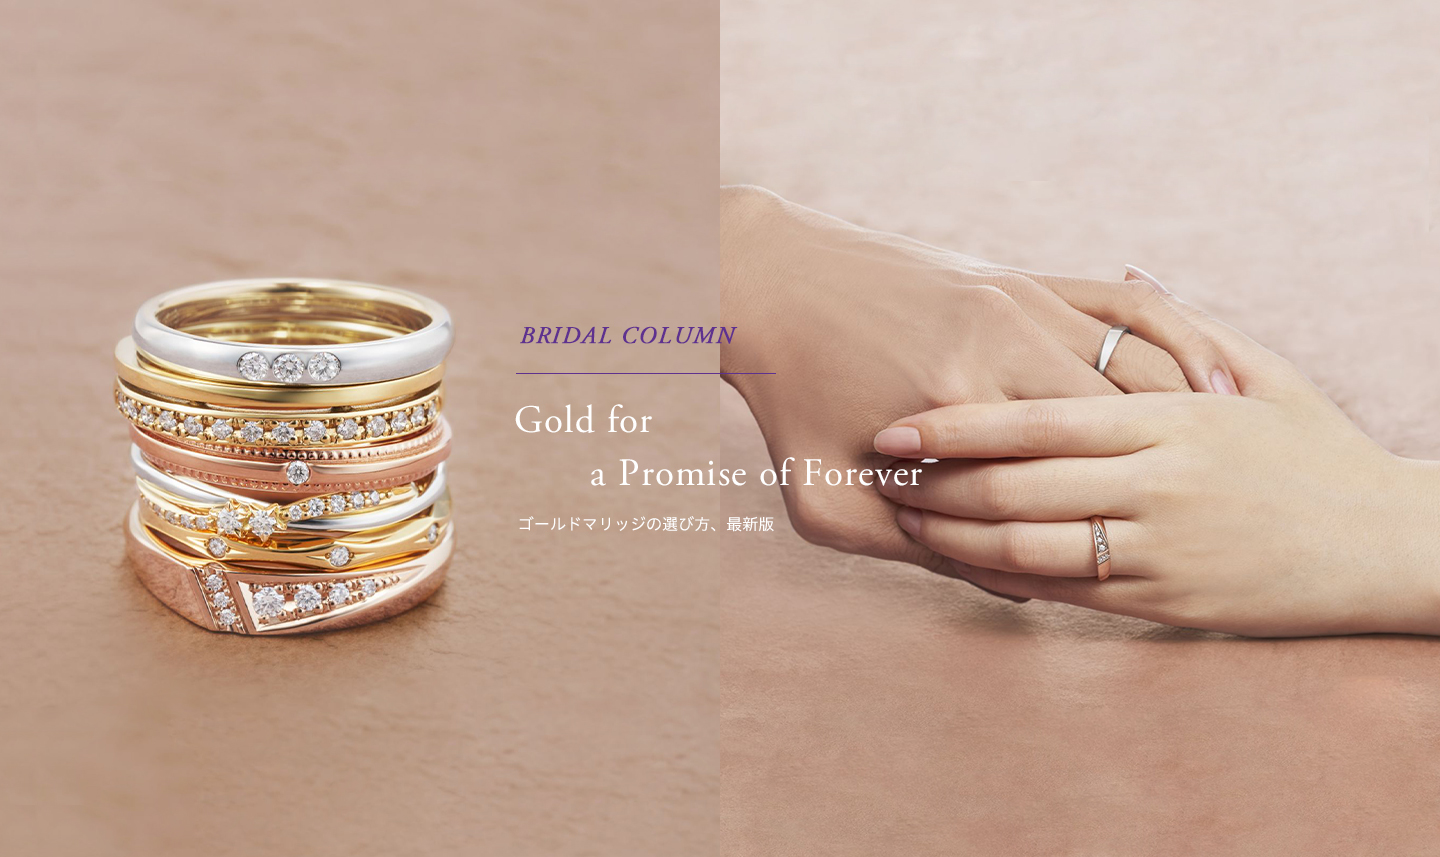 Gold for a Promise of Forever